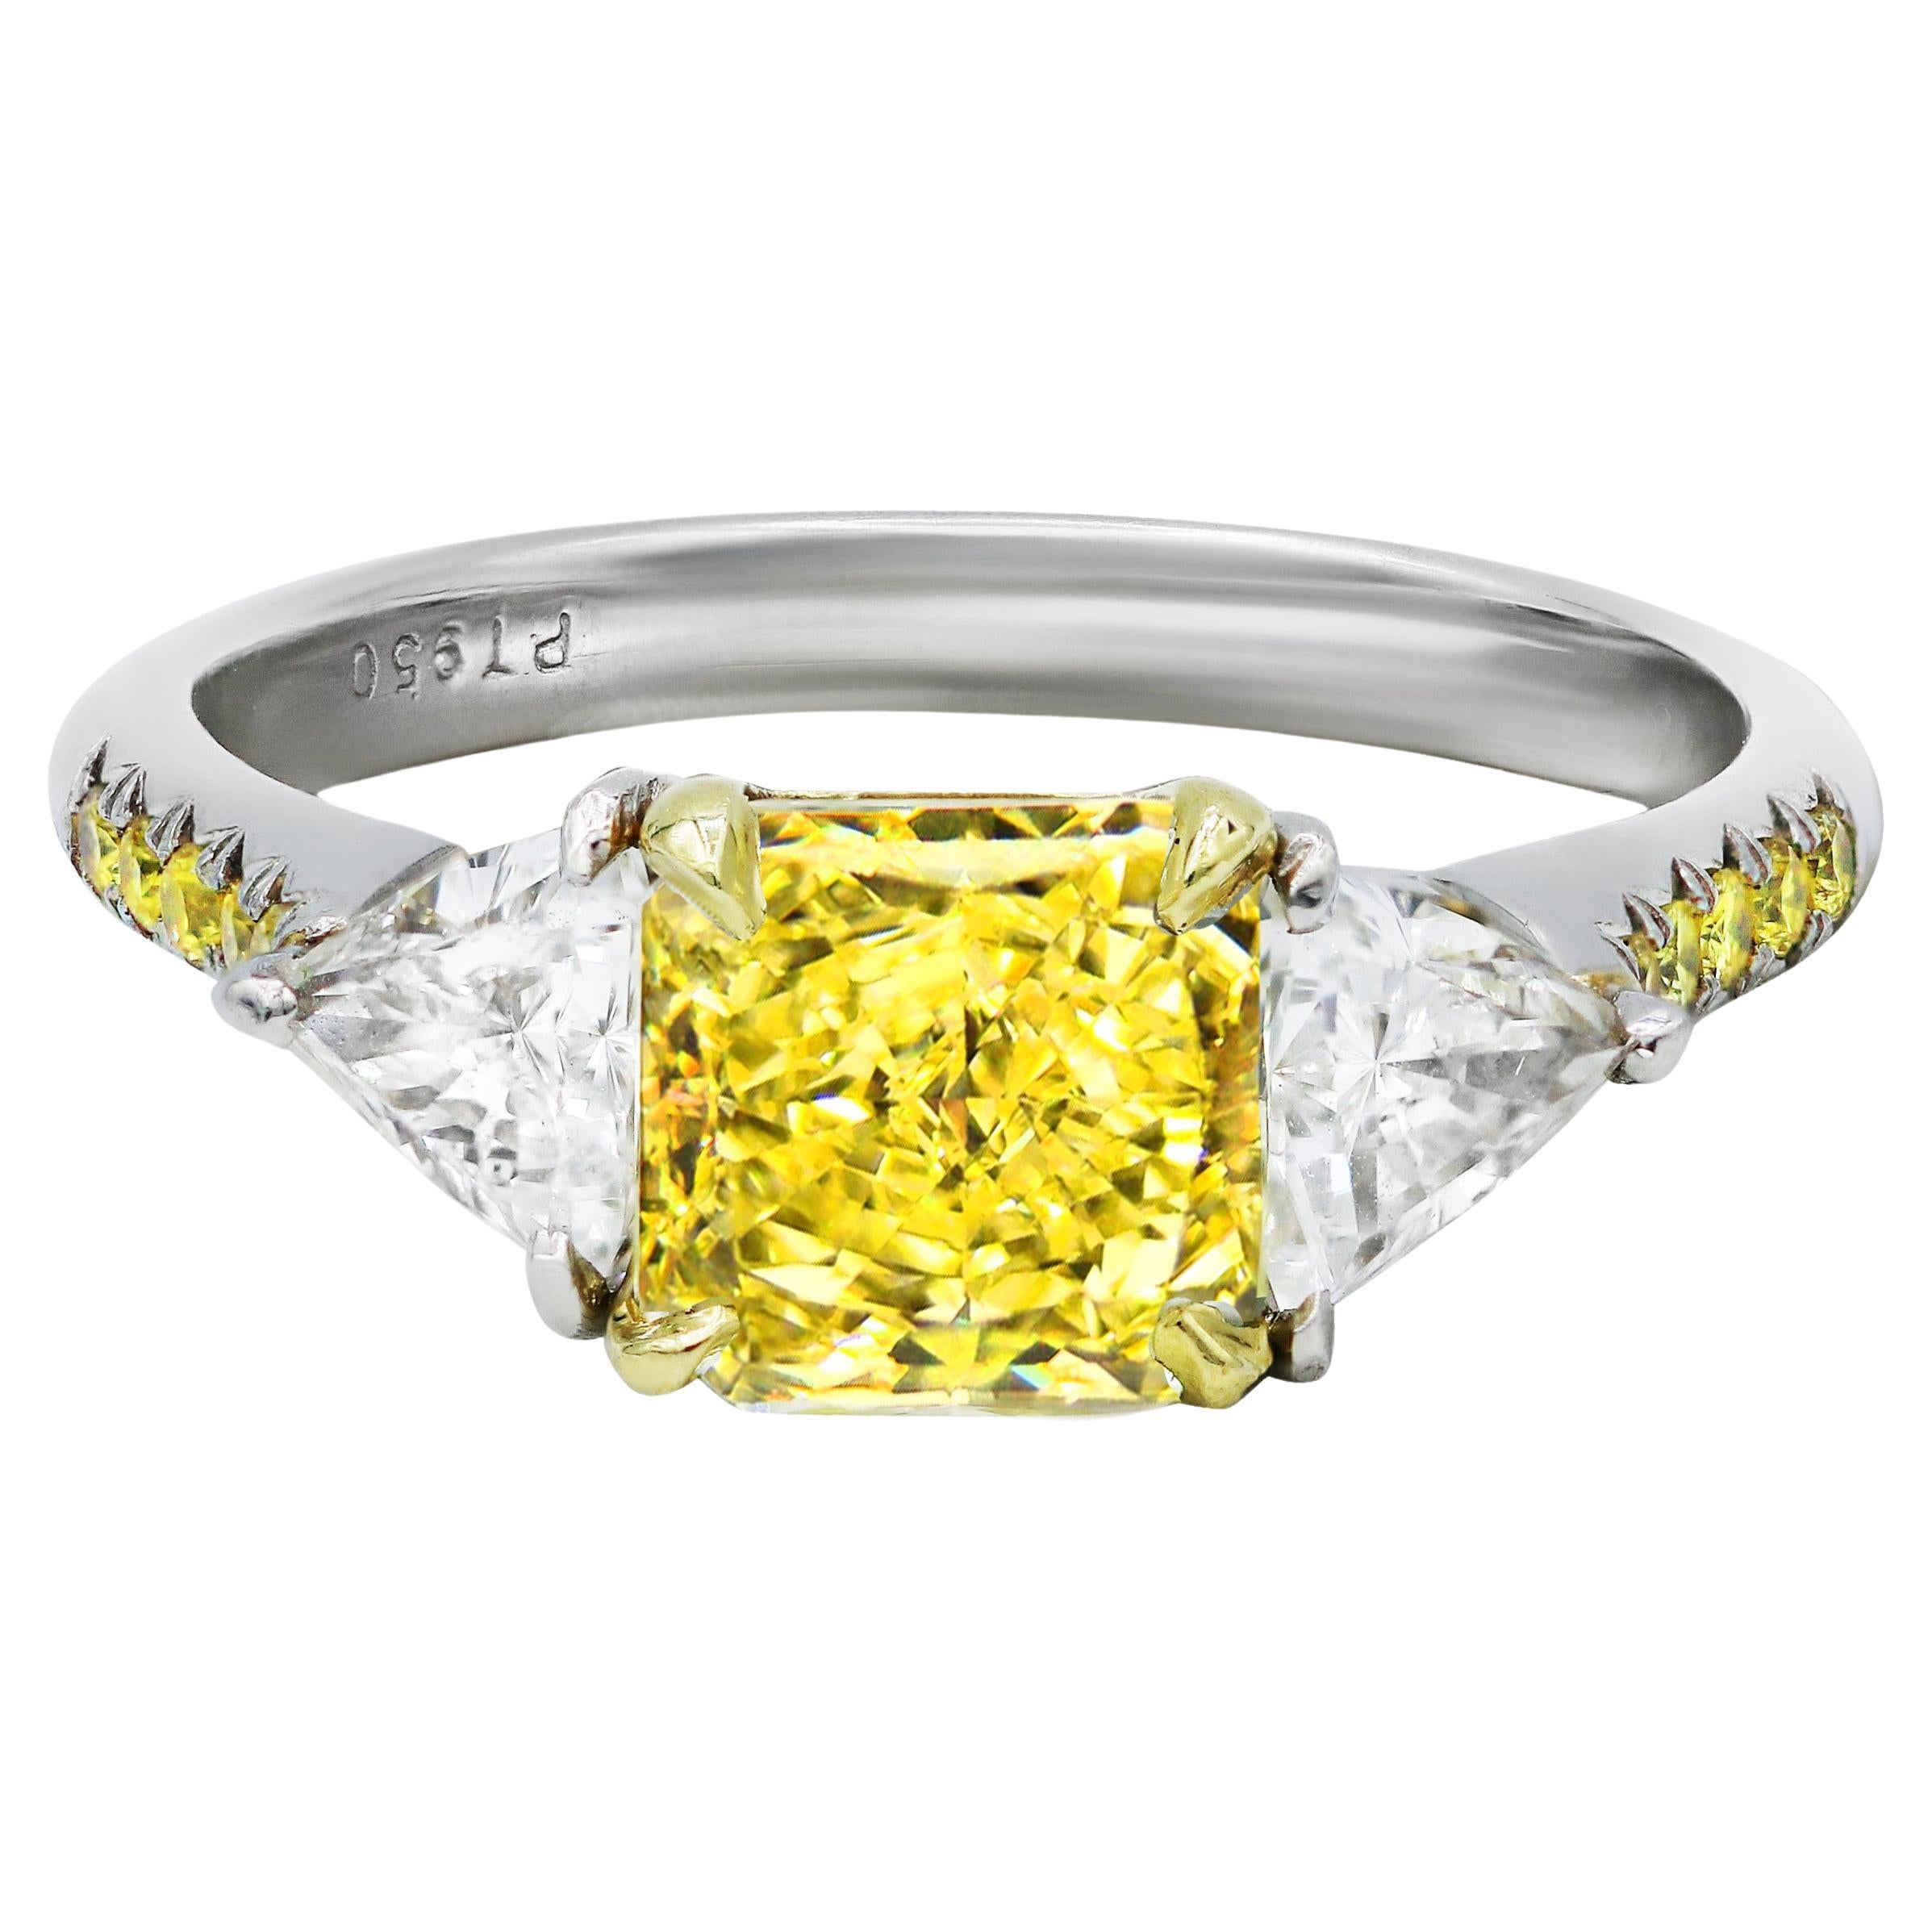 Diana M. Platinum  1.42 ct radiant cut yellow diamond (FY VS2) engagement ring For Sale